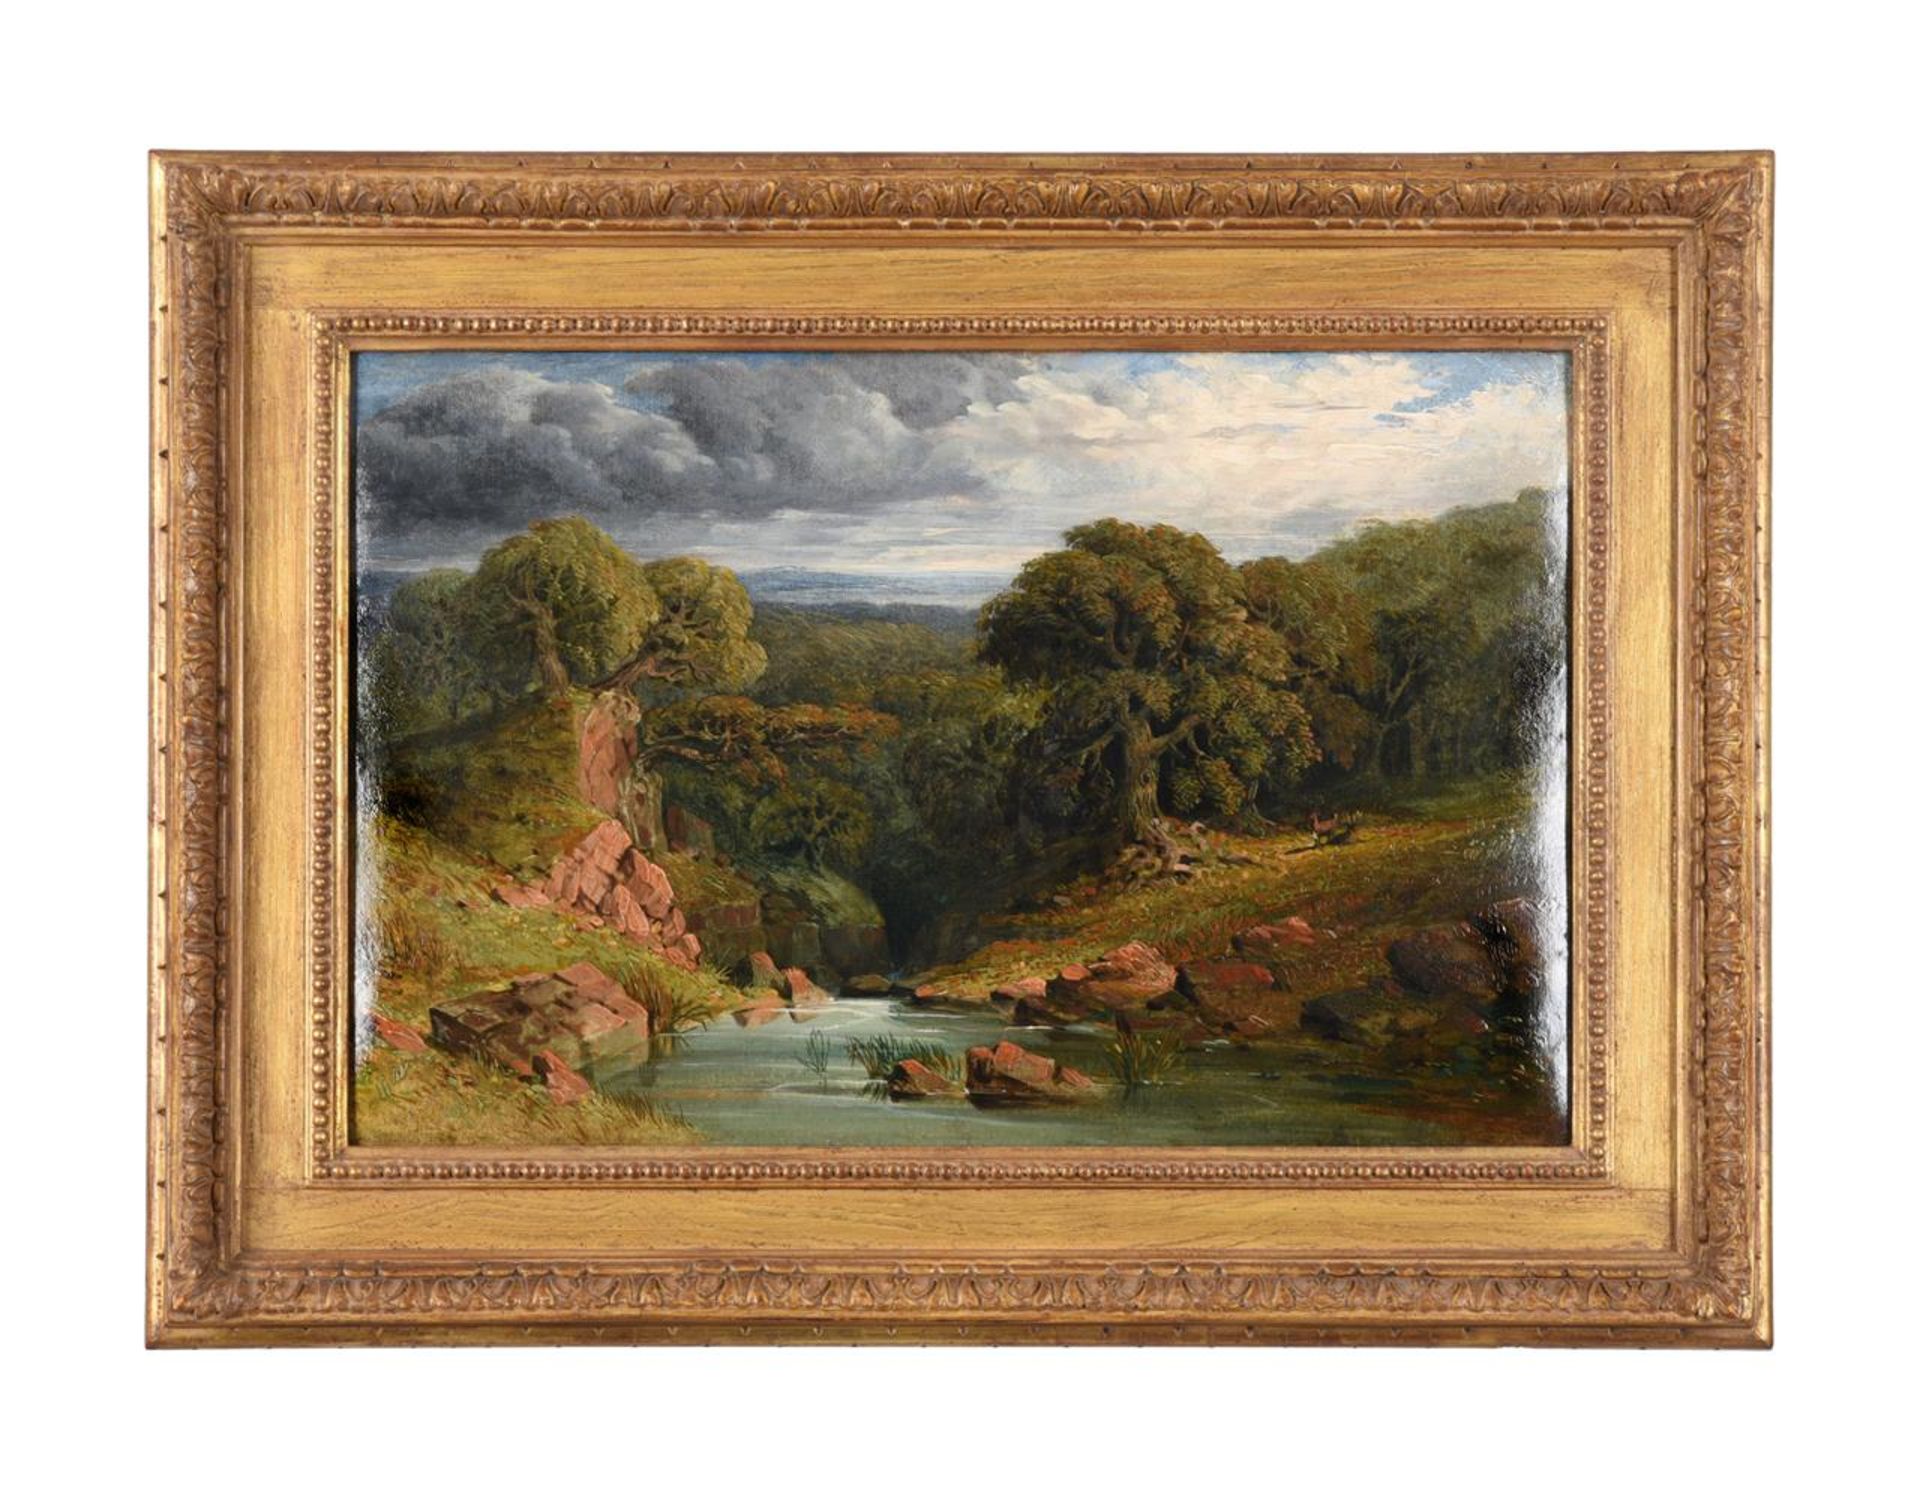 JOHN LINNELL (BRITISH 1792-1882), ENGLISH LANDSCAPE WITH DEER BY A RIVER - Bild 4 aus 5